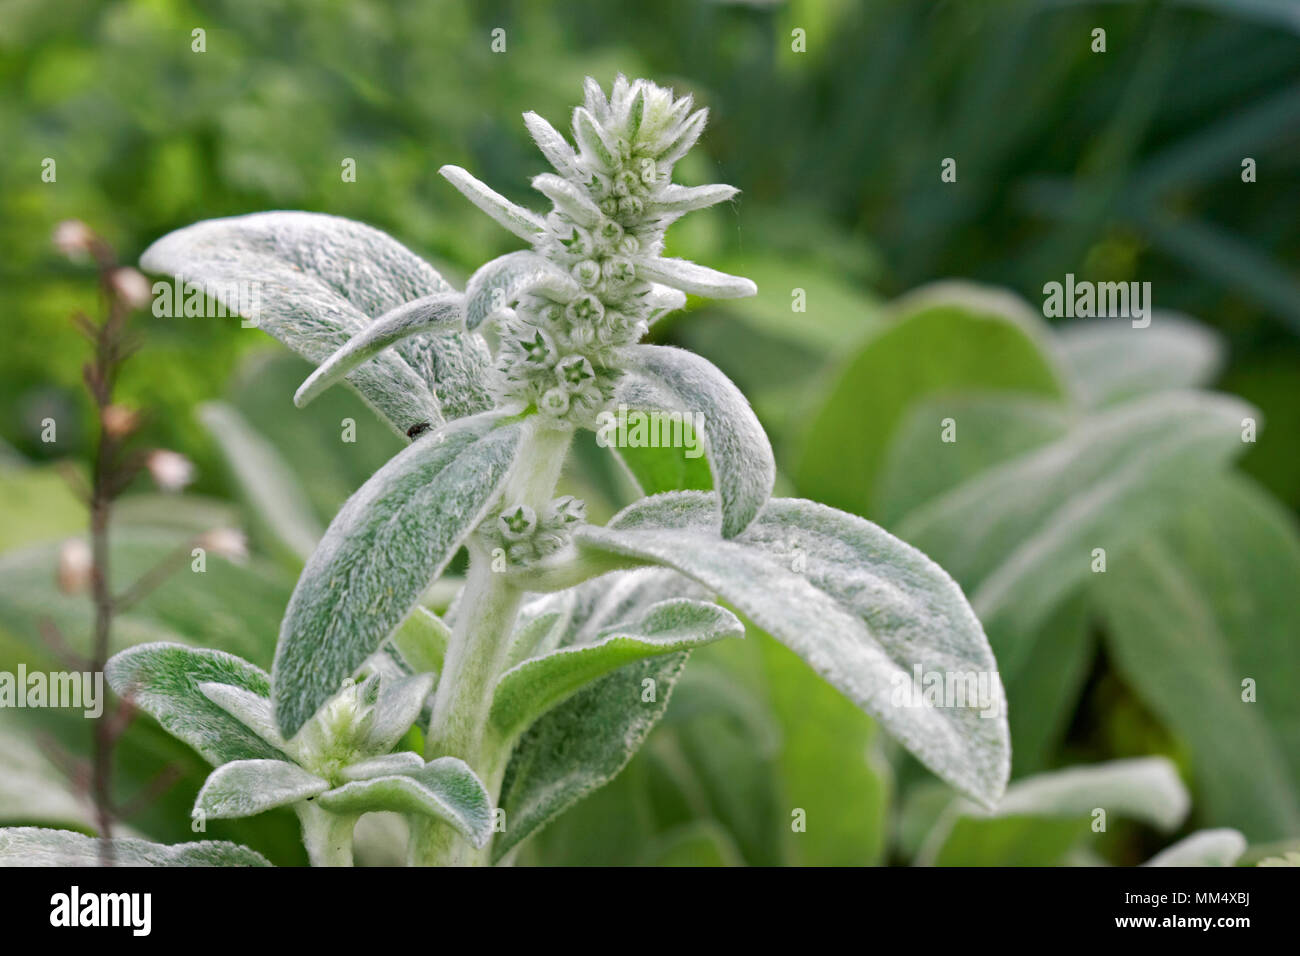 Top part of Lamb's-Ear, or Woolly Hedgenettle plant with stem, leaves and flower buds. Scientific name: Stachys byzantina (syn. Stachys lanata). Stock Photo